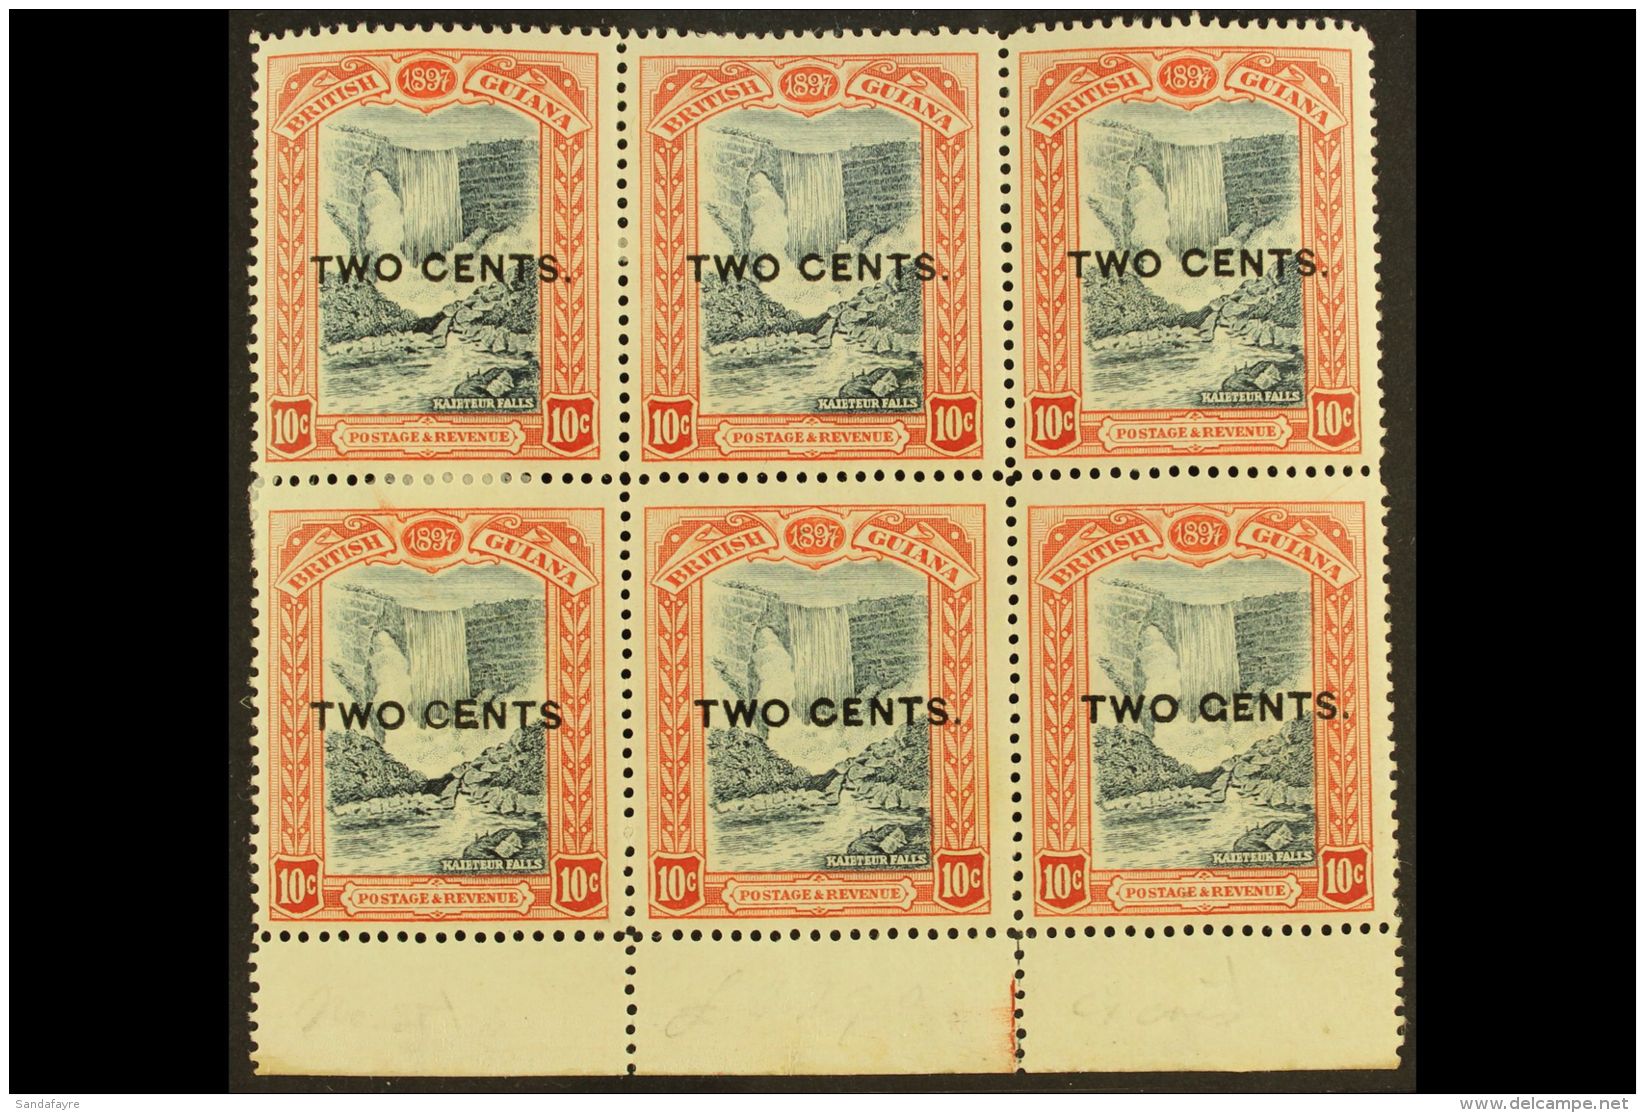 1899 POSITIONAL VARIETIES BLOCK 1899 2c On 10c Kaiteur Falls With NO STOP AFTER "CENTS" Variety, SG 223a, Plus... - Brits-Guiana (...-1966)